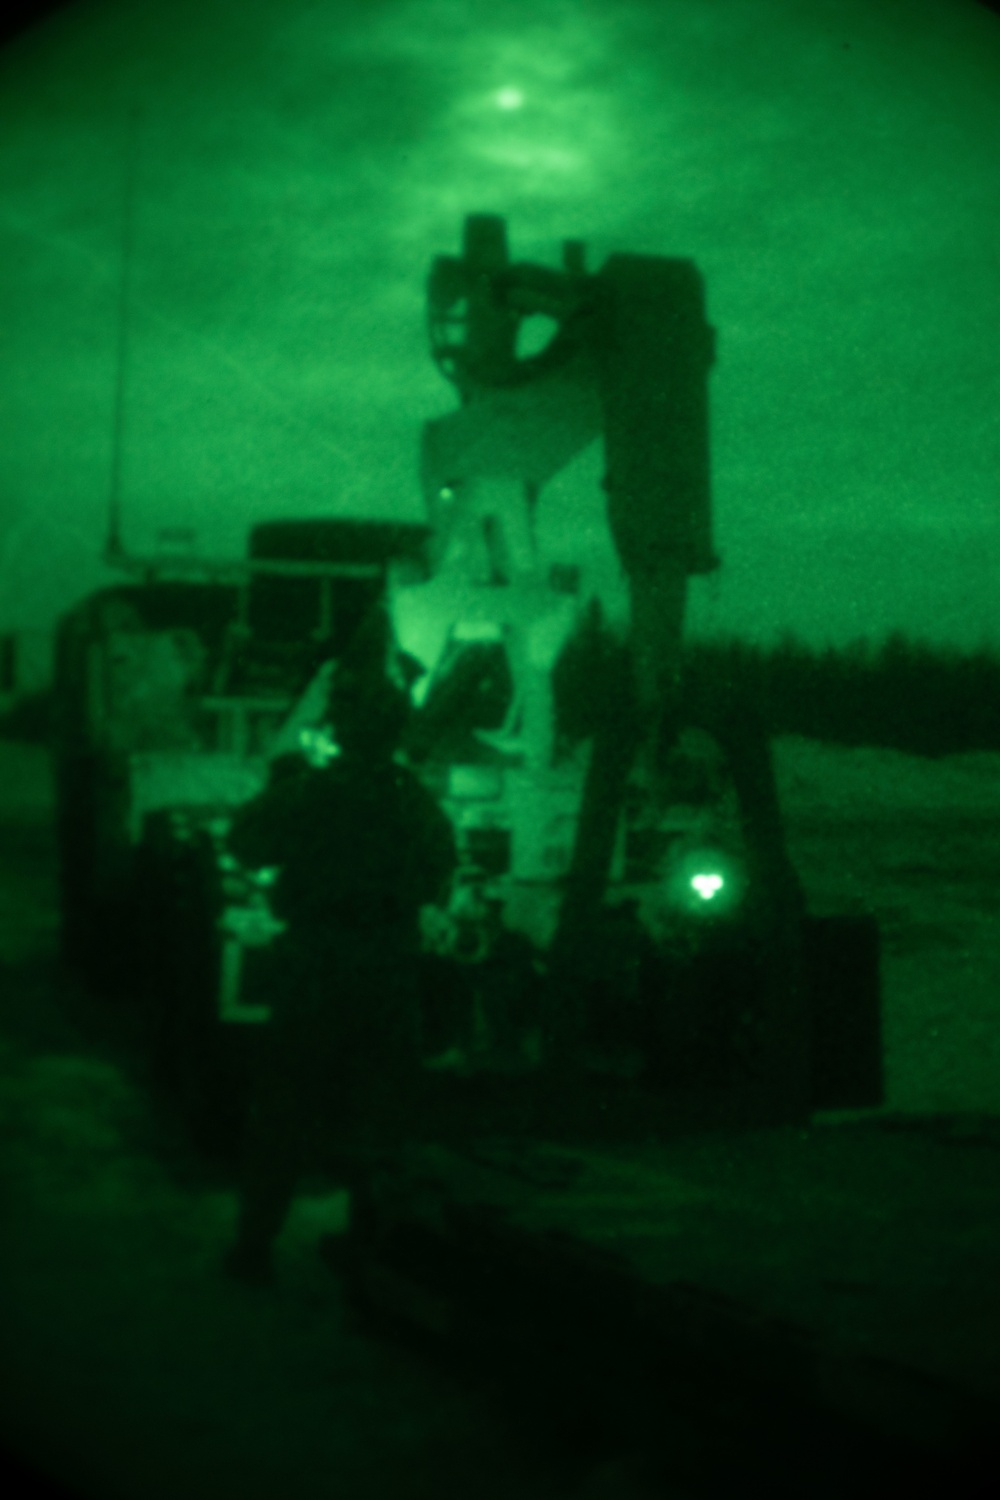 M984 Wrecker Transports Equipment During a Sling Load Operation